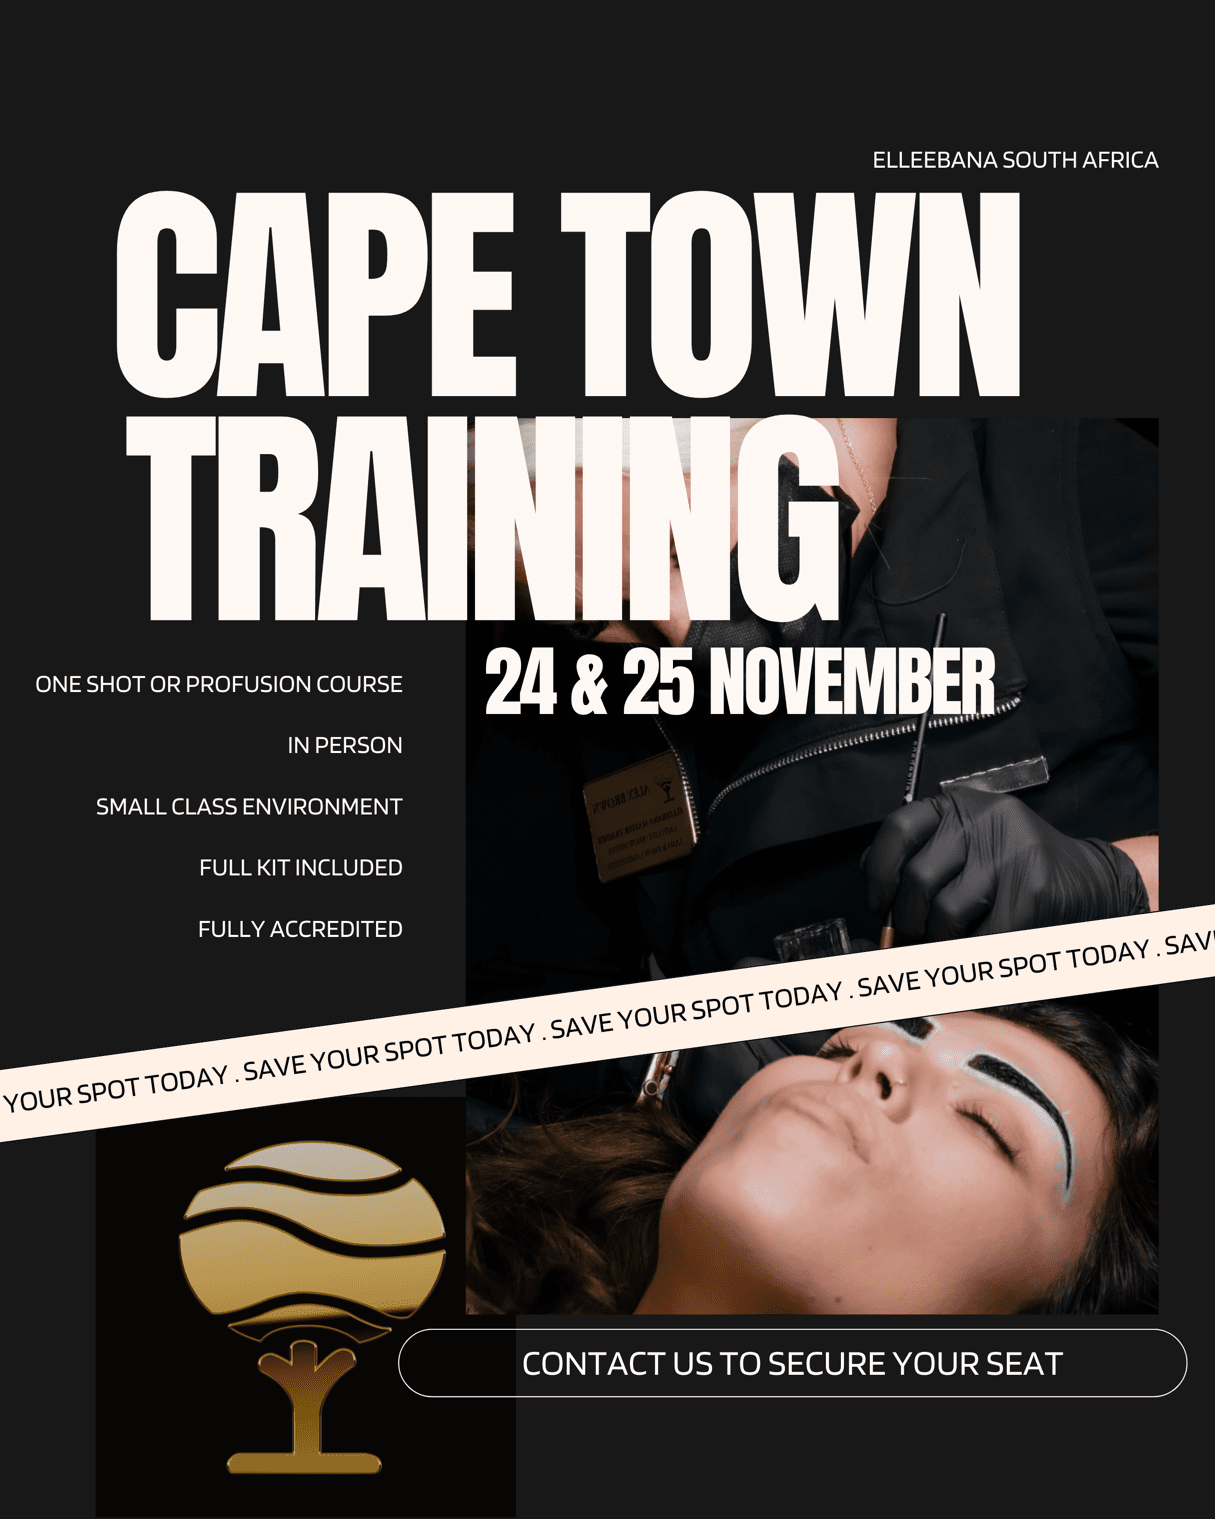 Cape Town Training Dates | Allure Professional Products